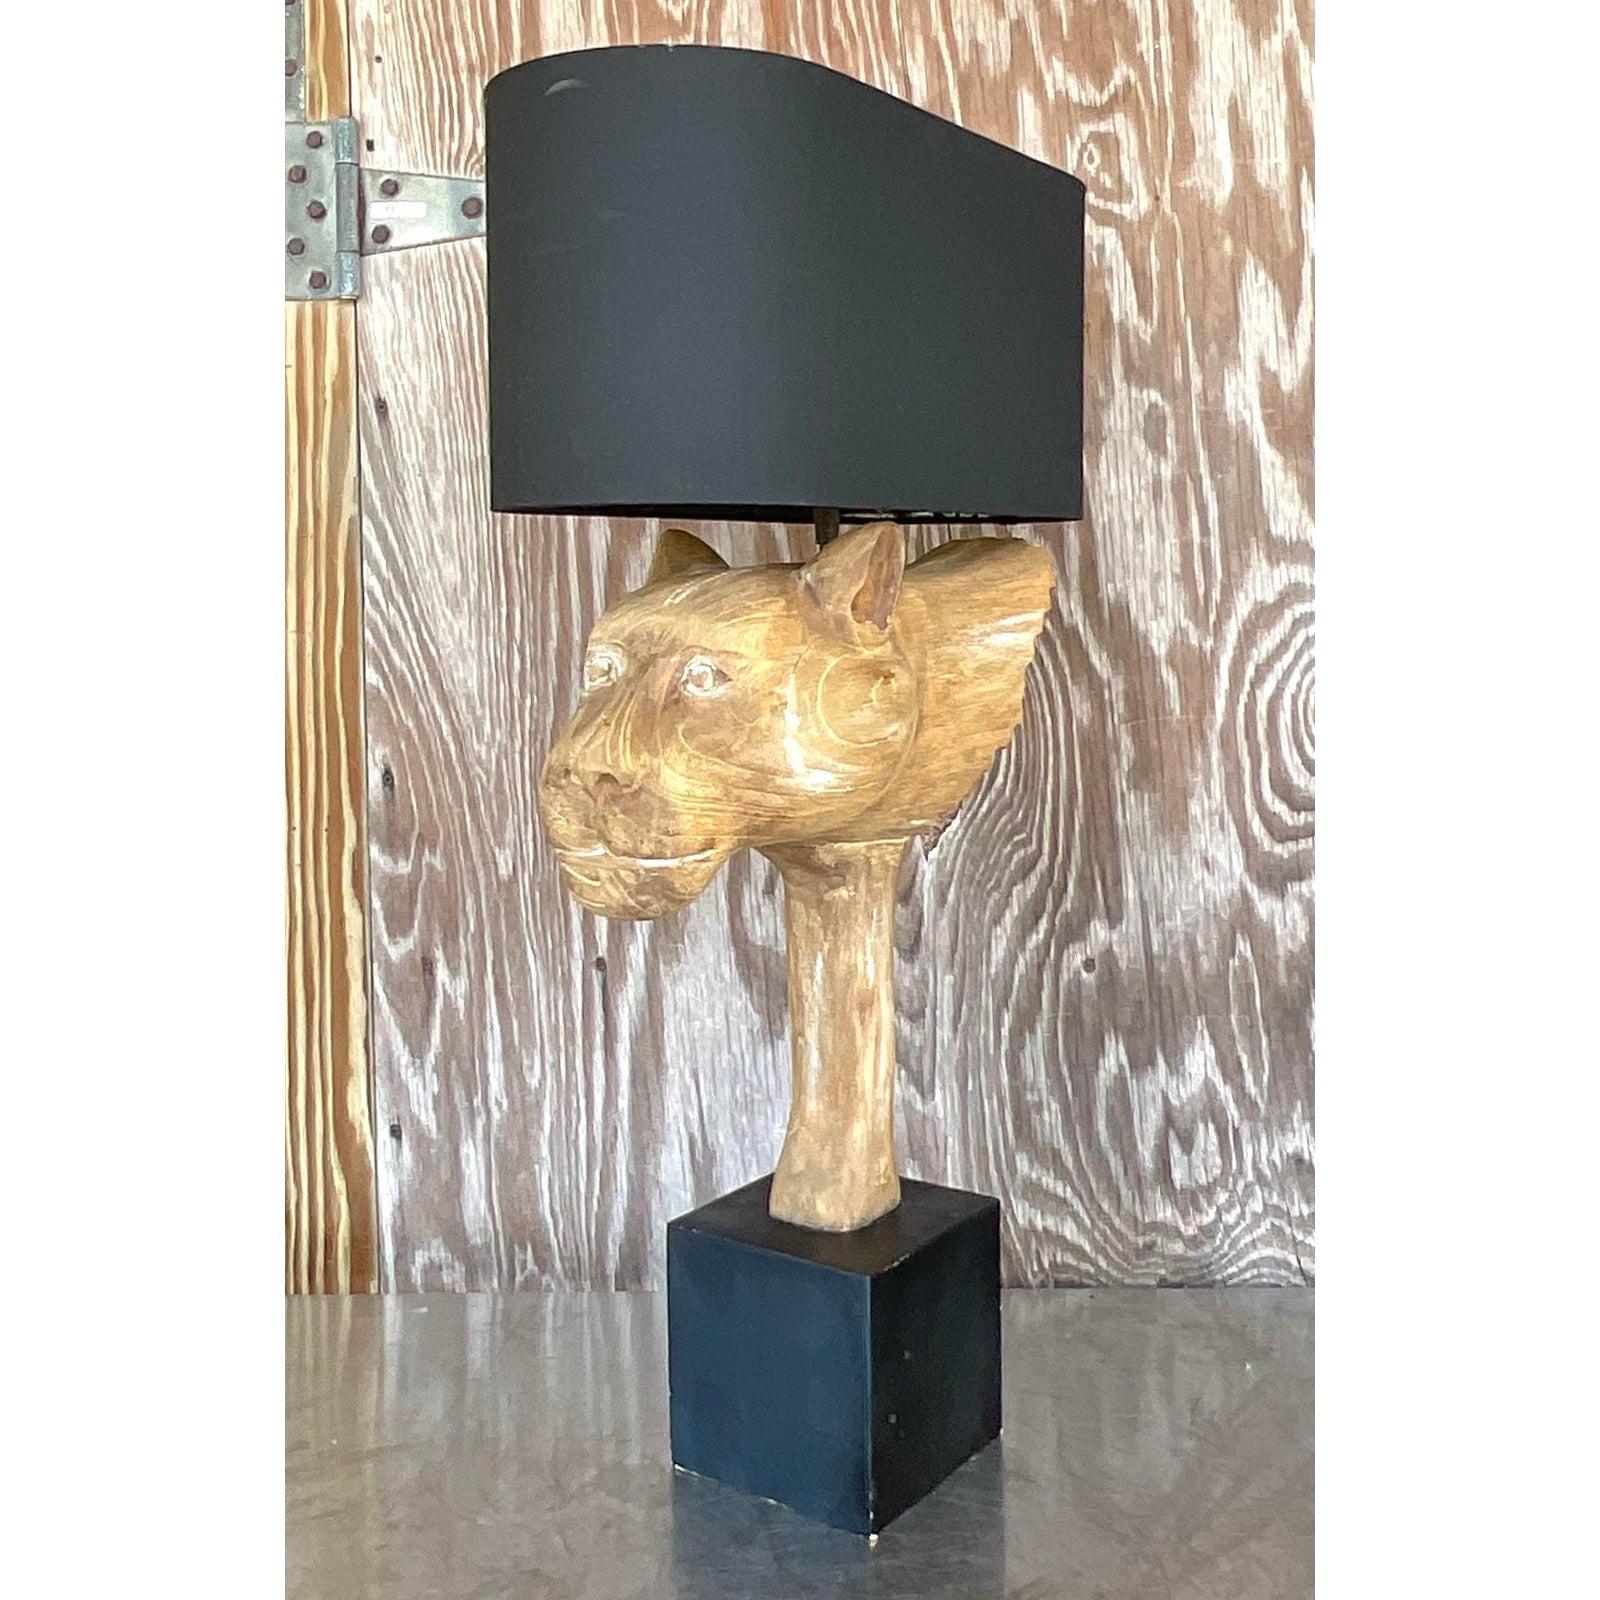 A striking vintage Boho table lamp. A gorgeous cerused finish on wood with a coordinating black linen shade. A handsome winged lions head. Acquired from a palm Beach estate.